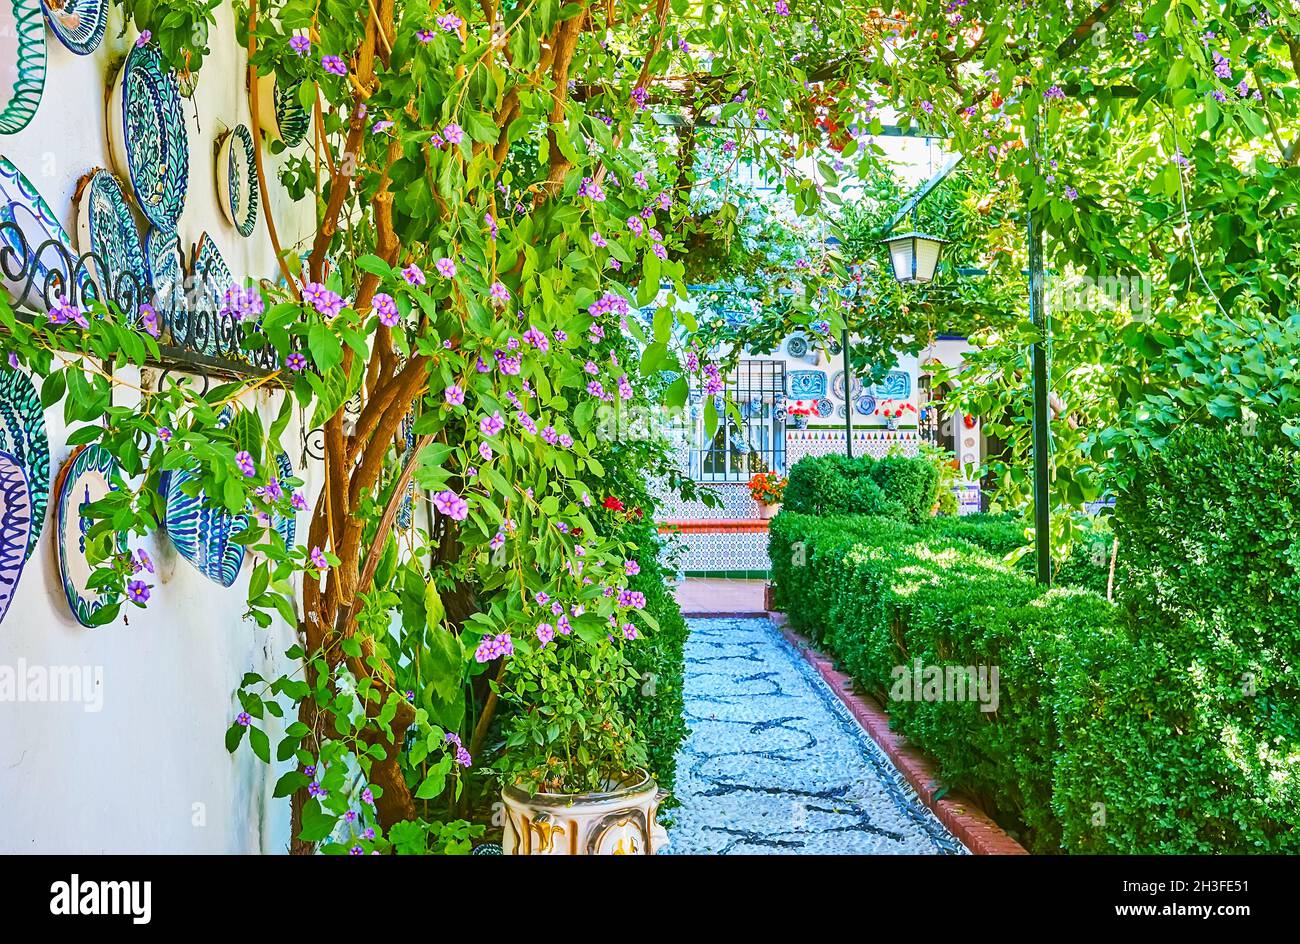 Traditional Andalusian yard, decorated with beautiful ceramic plates with patterns and lush green garden with trimmed and blooming plants, Granada, Sp Stock Photo